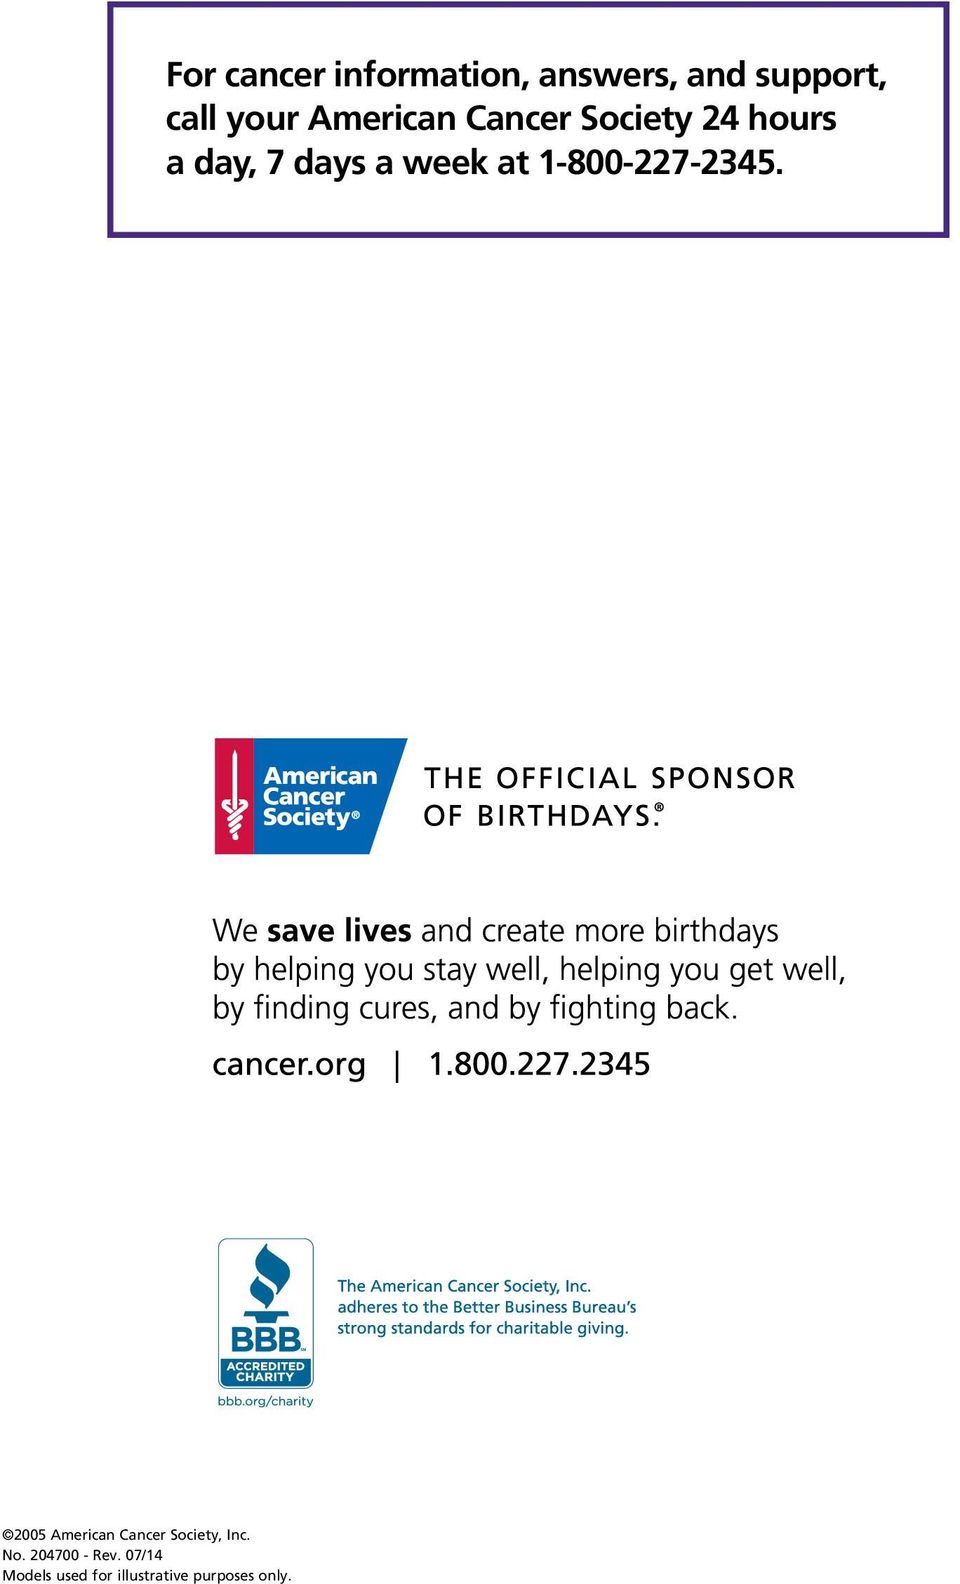 For cancer information, answers, and support, call your